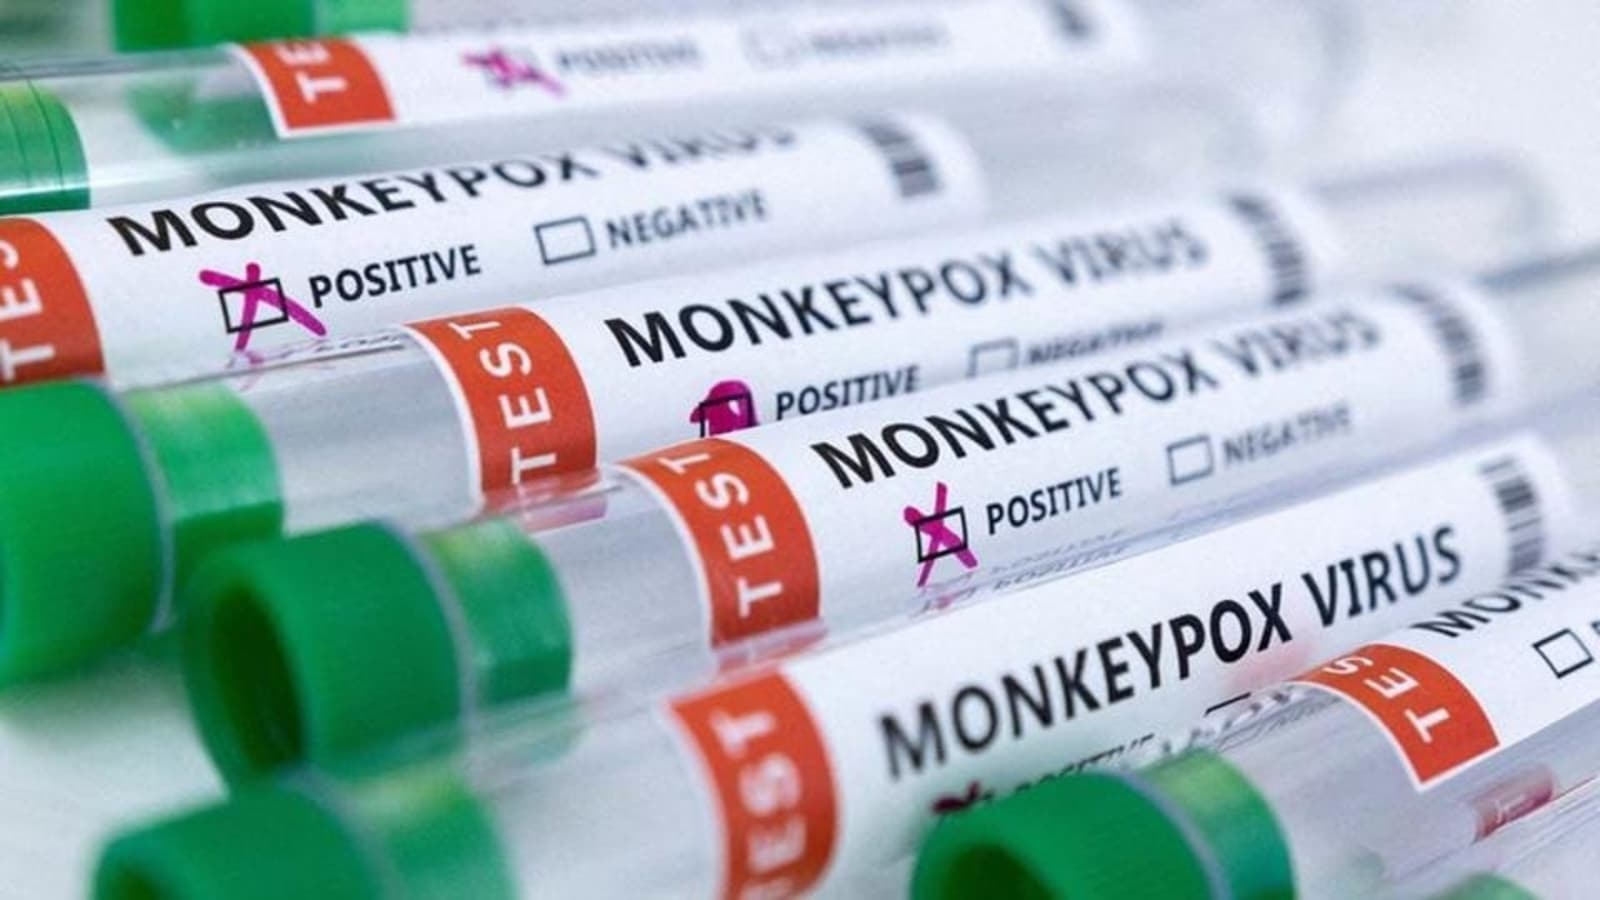 another-monkey-virus-on-verge-of-infecting-humans-here-is-what-researchers-say